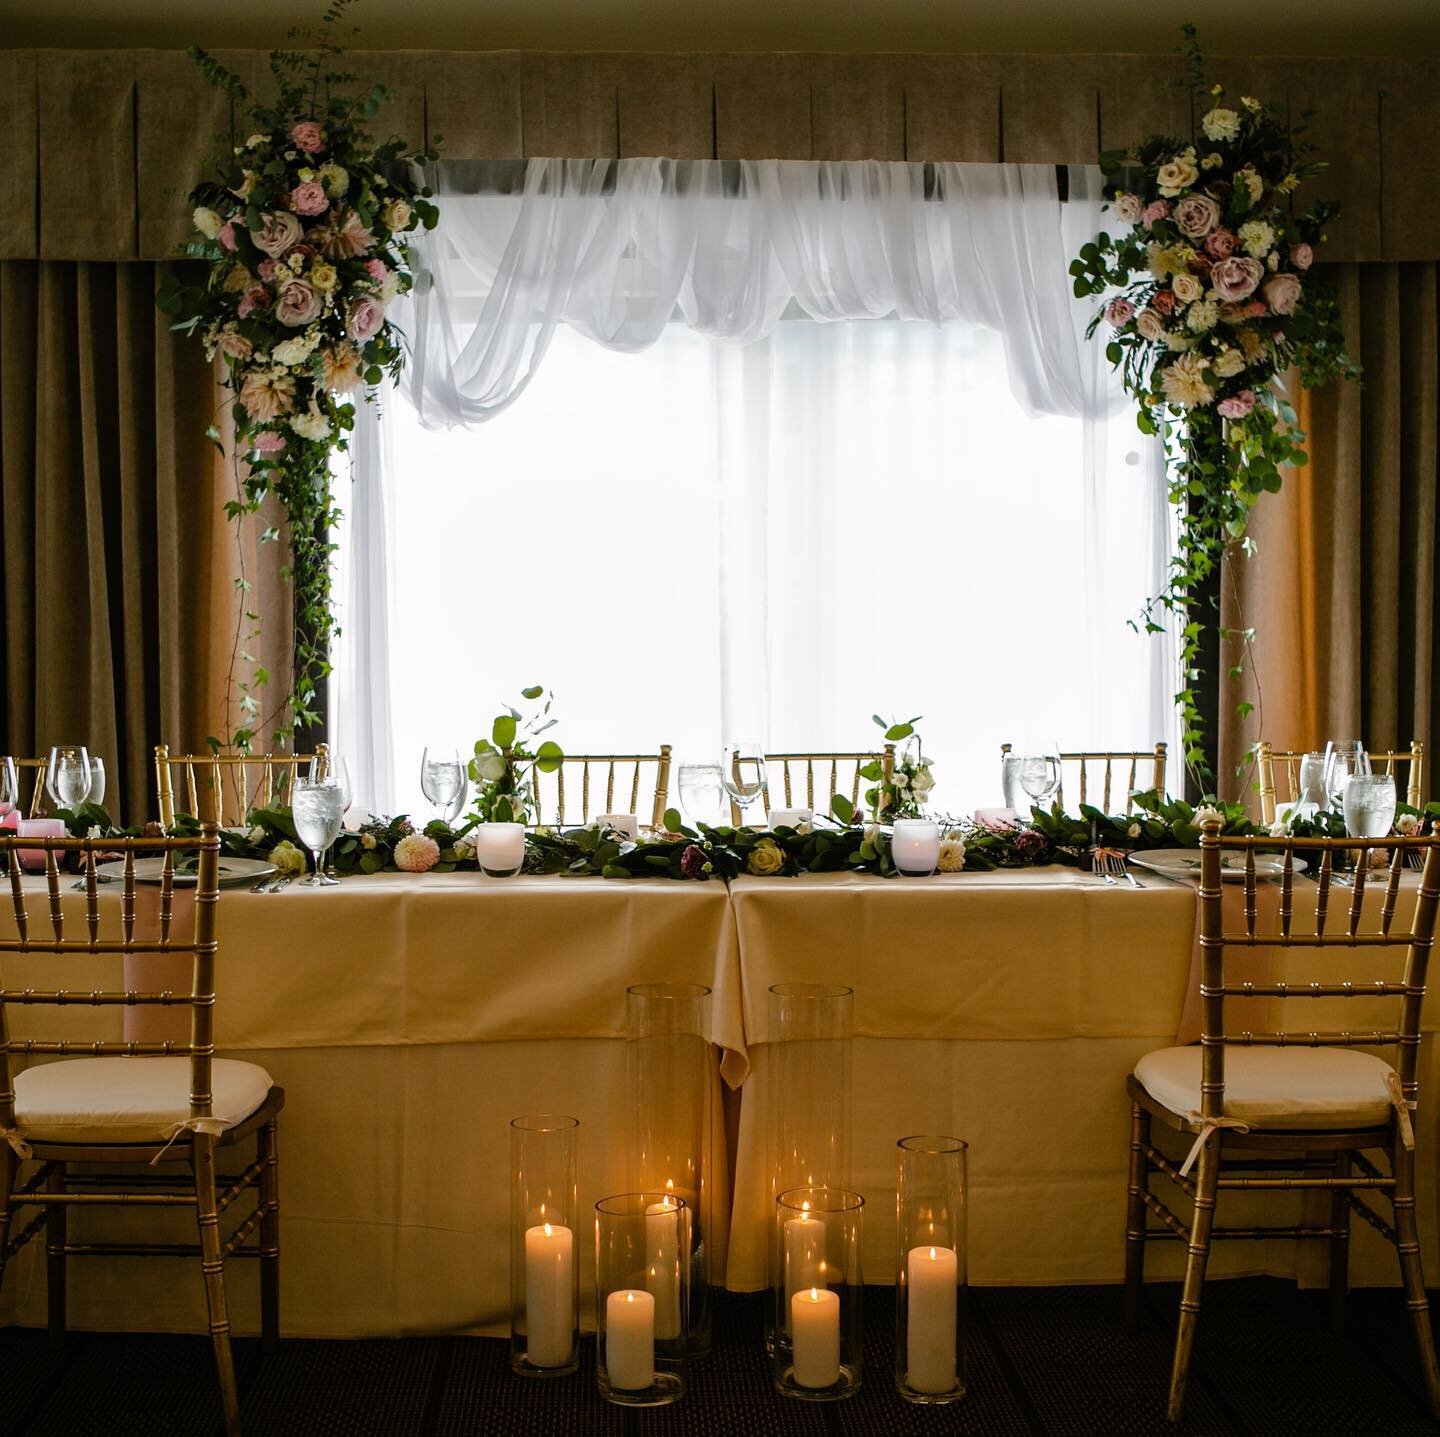 Ceremony decor transitioned to frame in the head table ... Always a good idea in our opinion!  #flowerfriday .
.
.
.
PC: @jennywohrlephoto .
.
.
.
#ceremony #headtable #citywedding